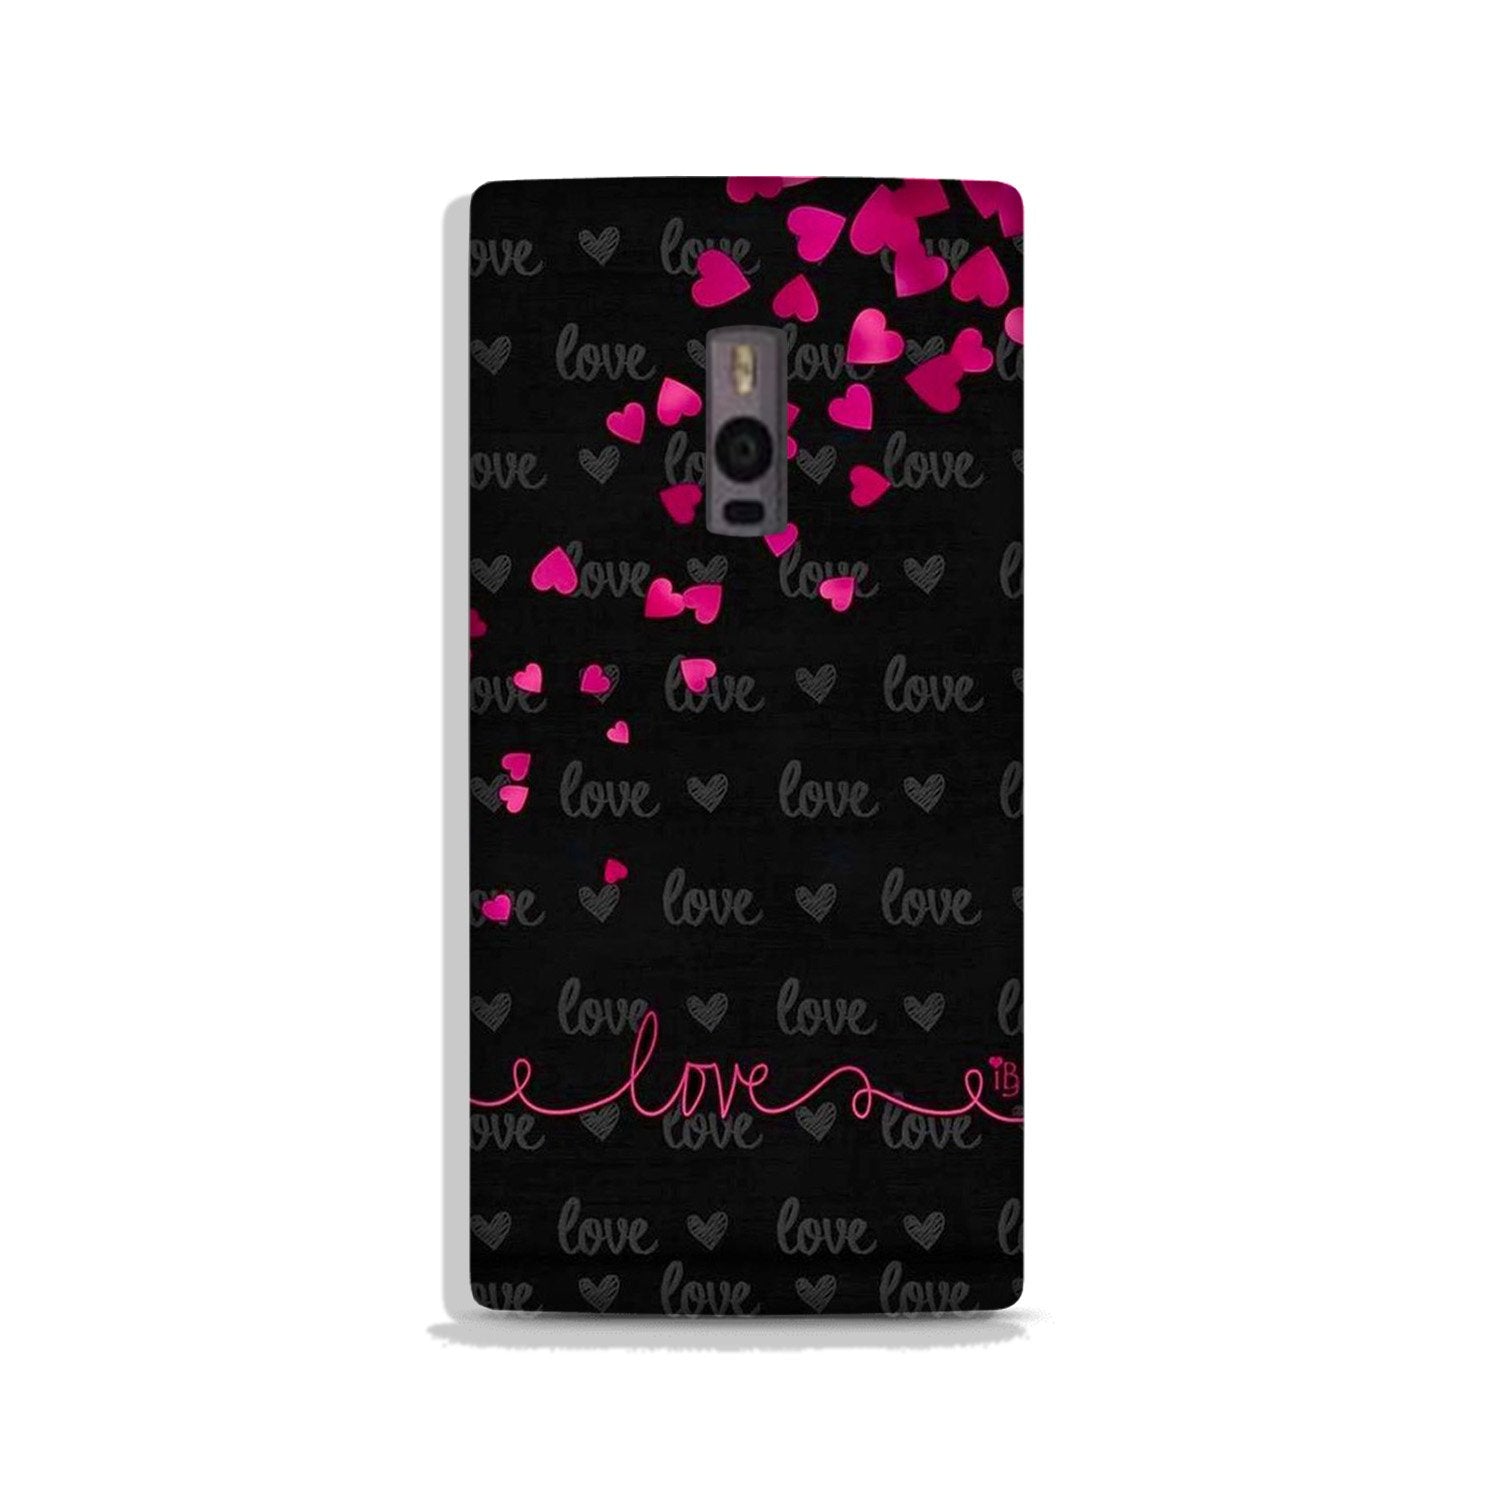 Love in Air Case for OnePlus 2